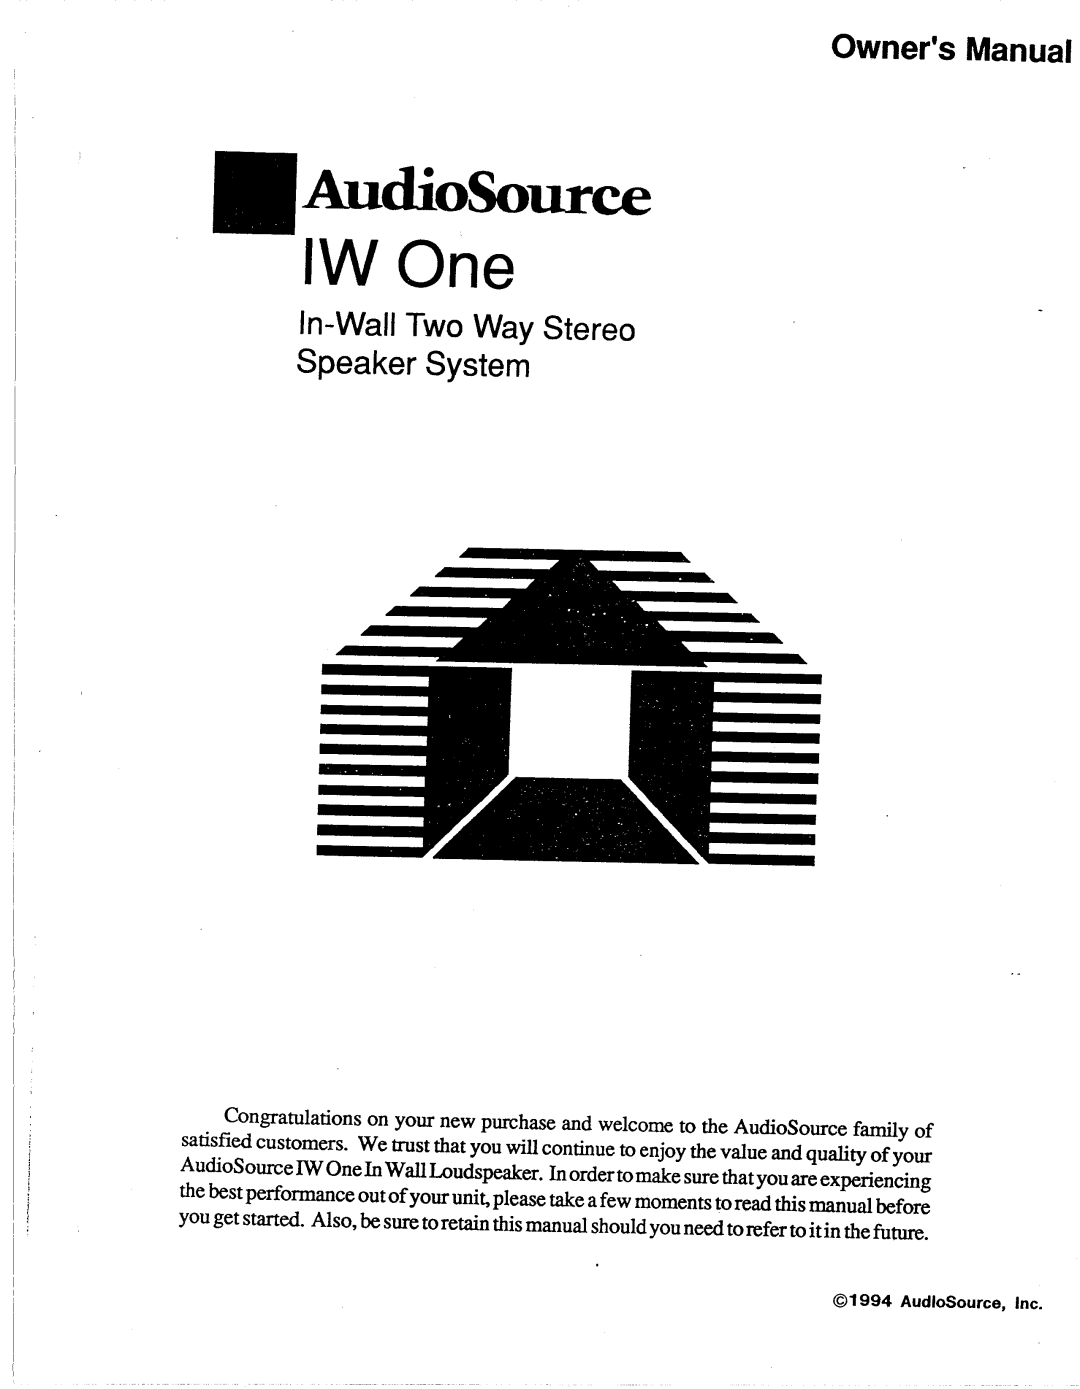 AudioSource AudioSource In-Wall Two Way Stereo Speaker System, IW One manual 